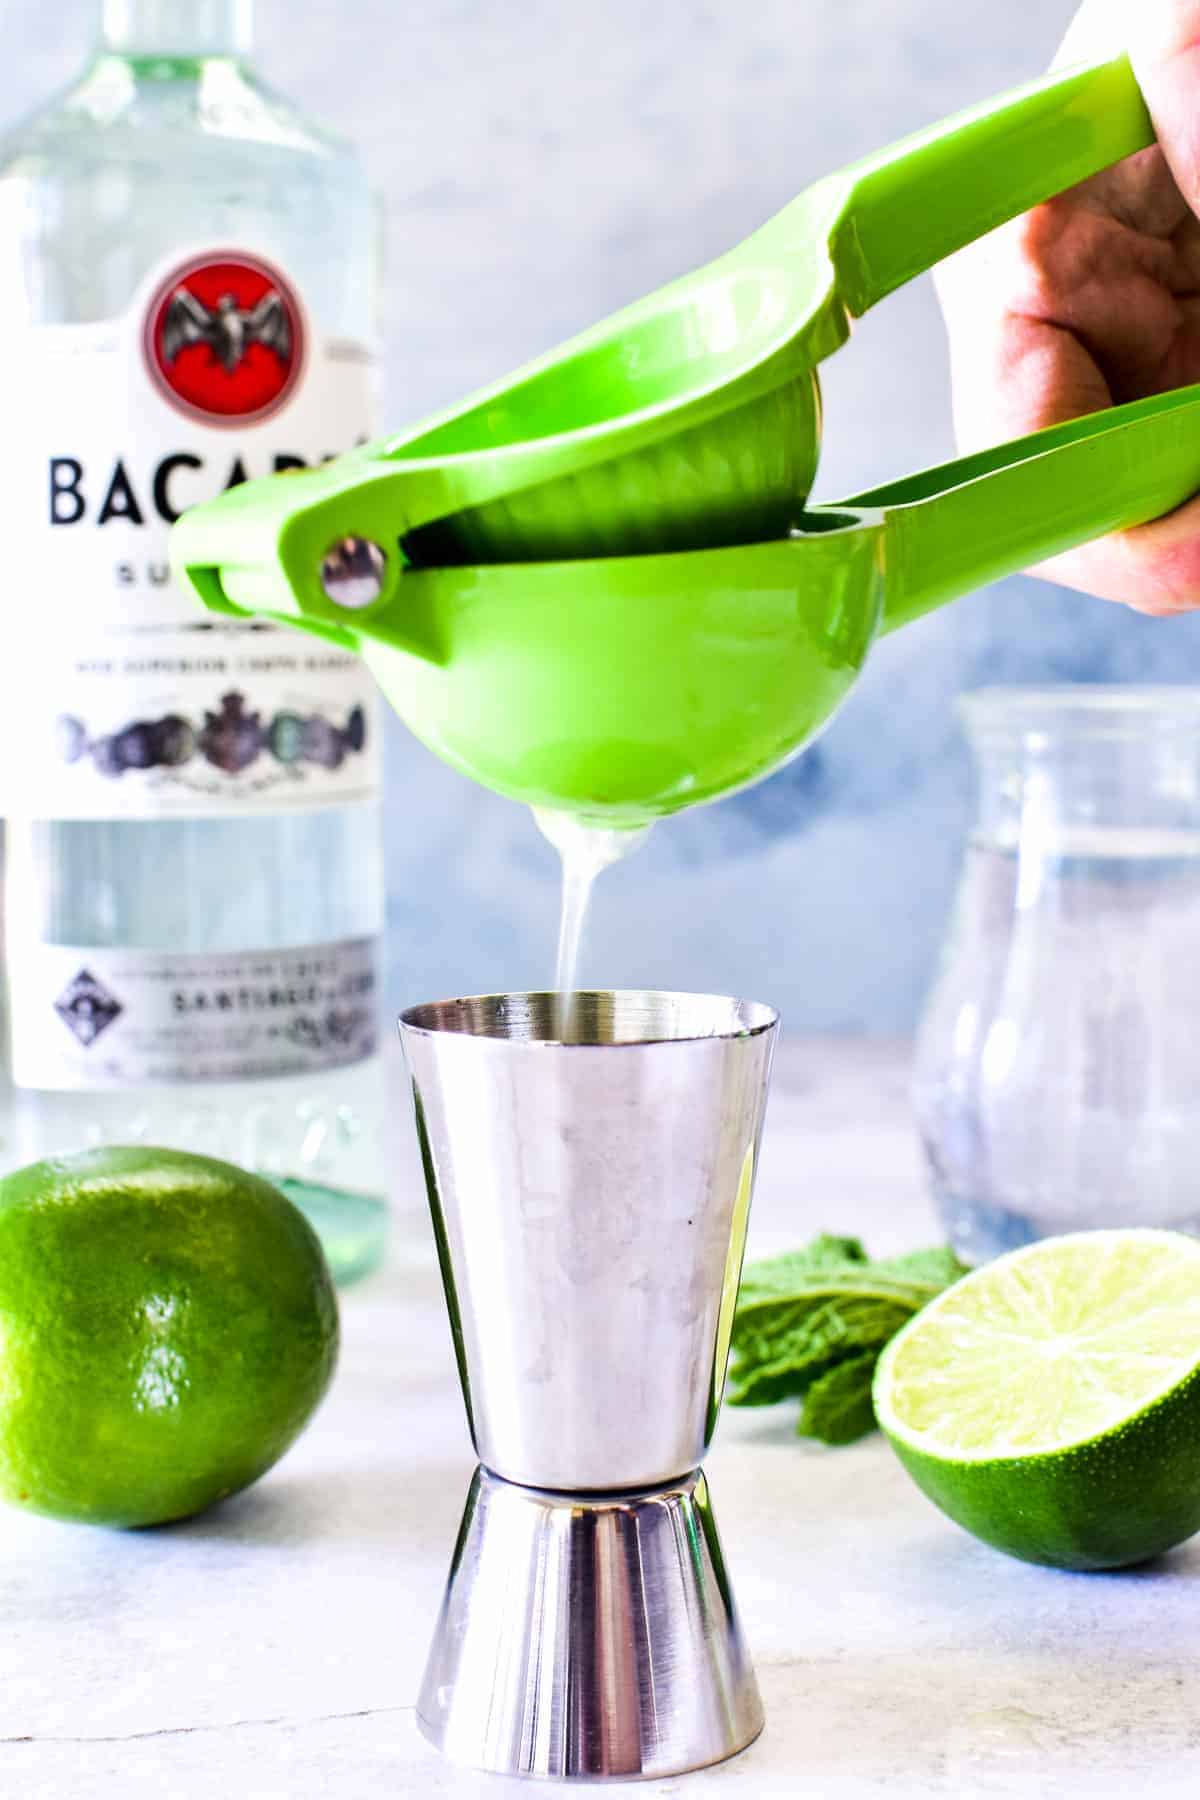 Juicing a fresh lime